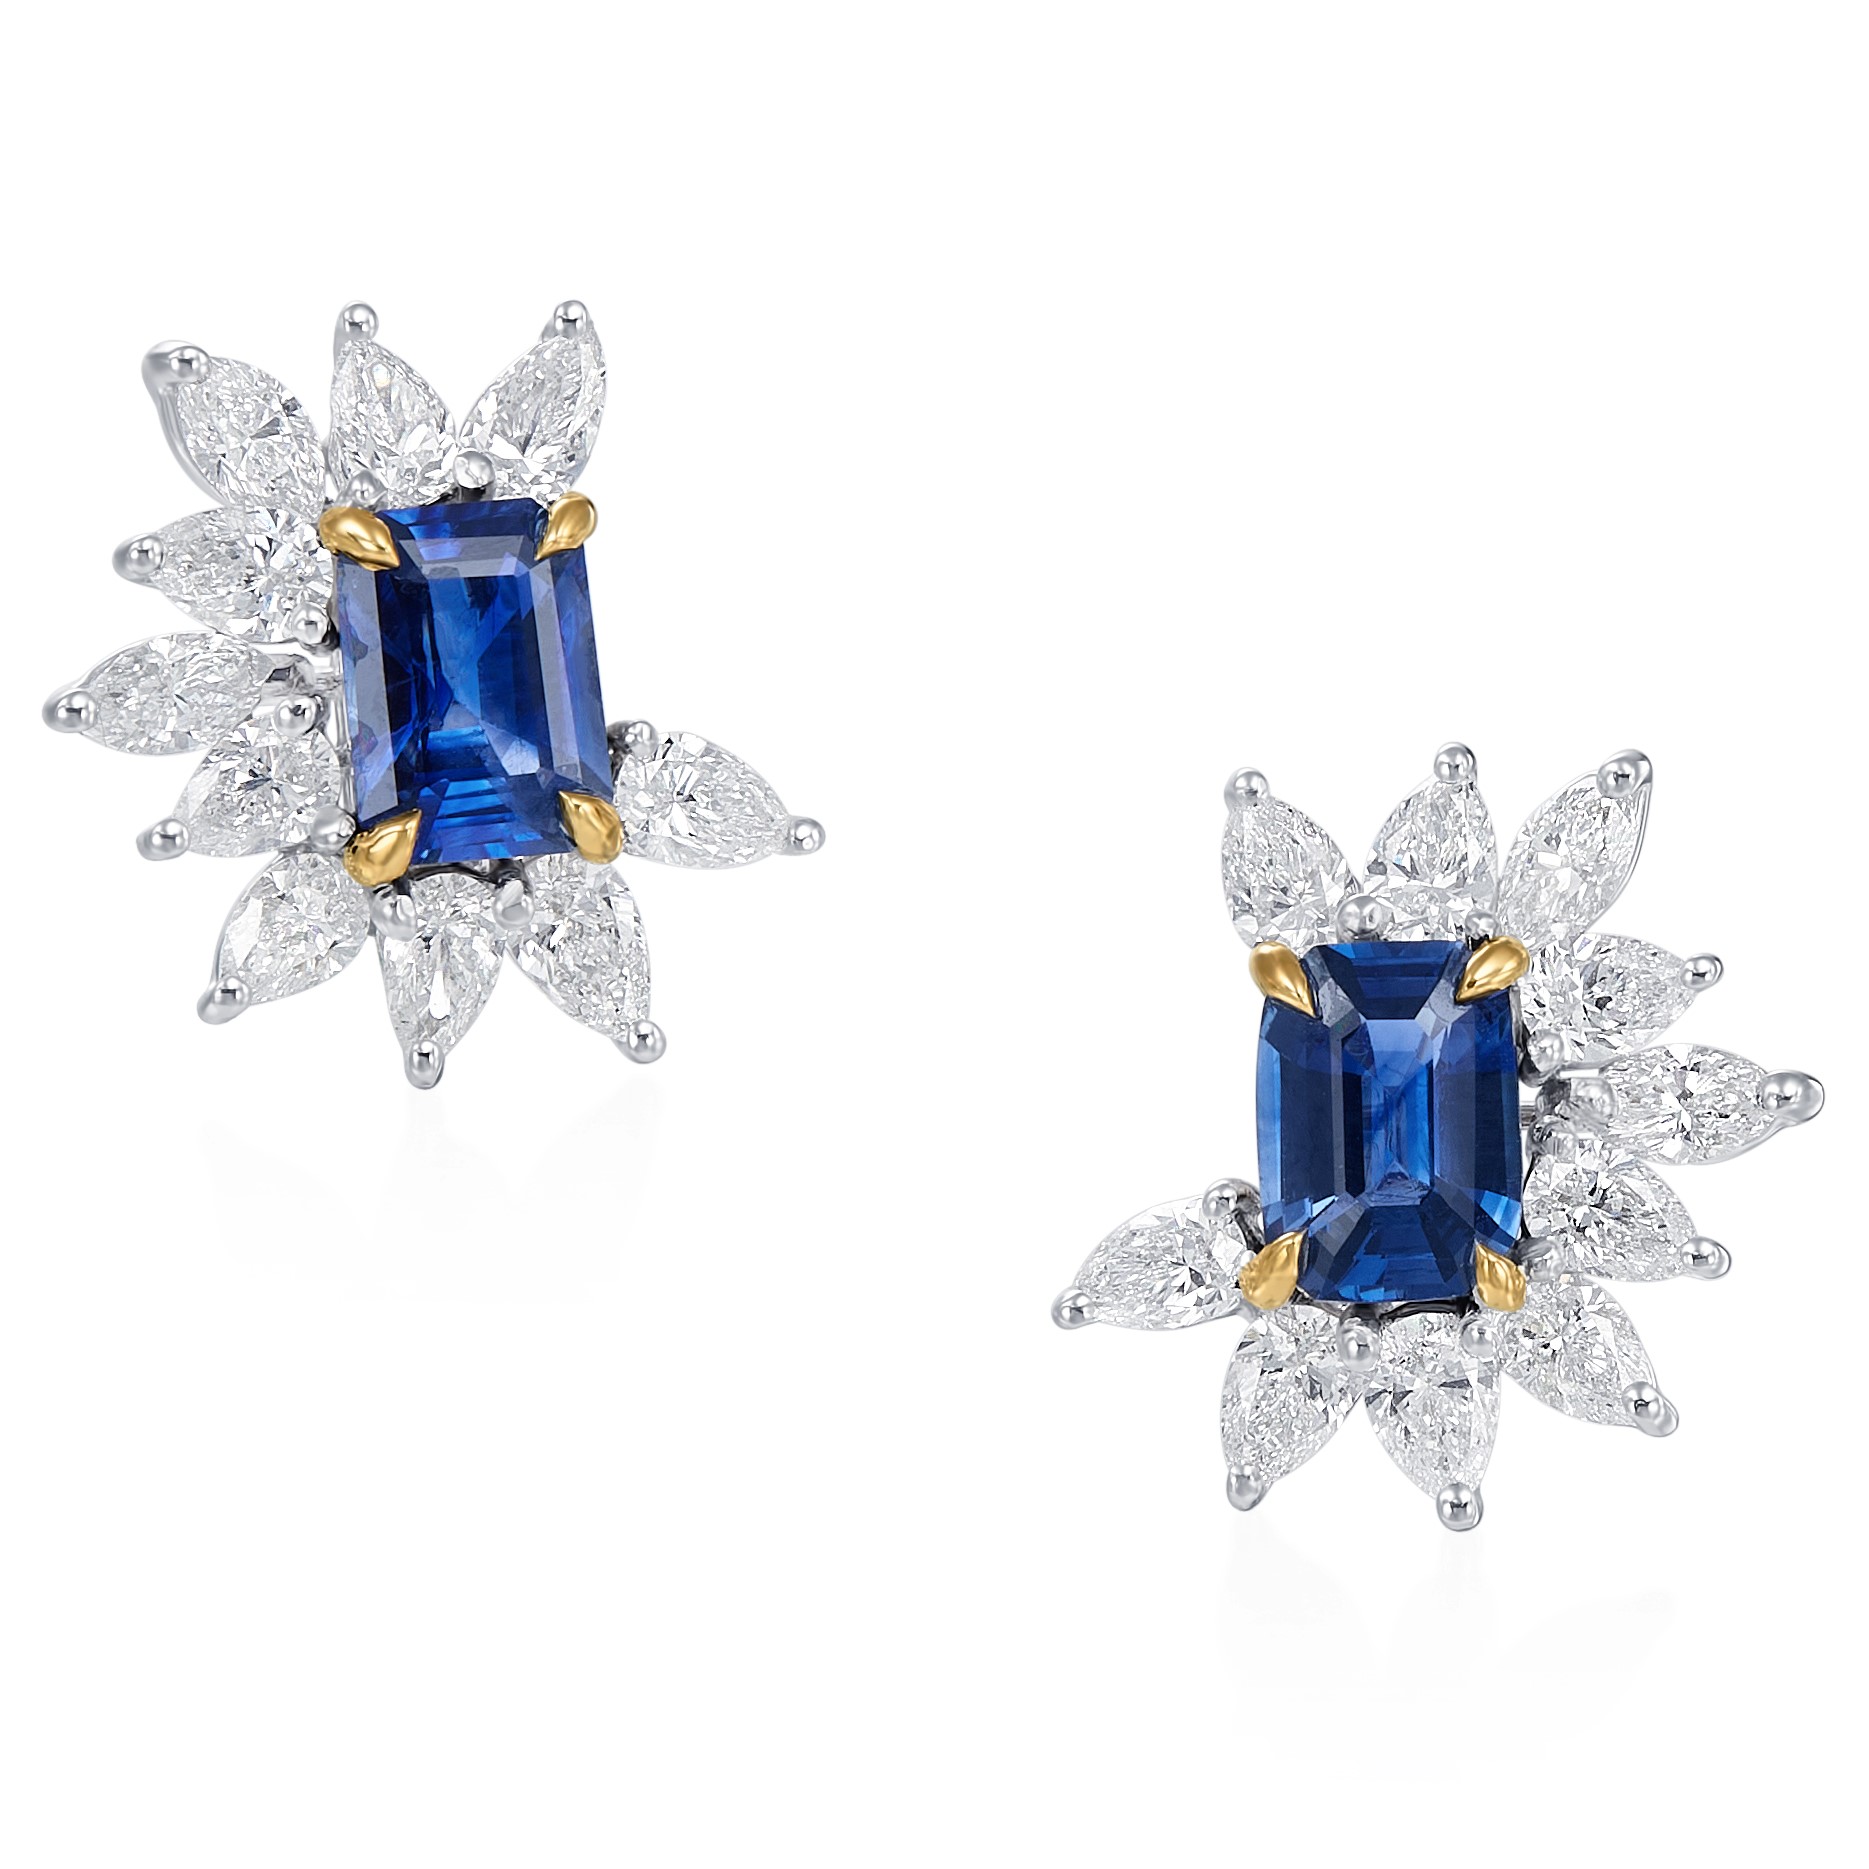 Korman Signature 18kt White and Yellow Gold  Emerald Cut Sapphire and Pear Shaped Diamond  Stud Earrings